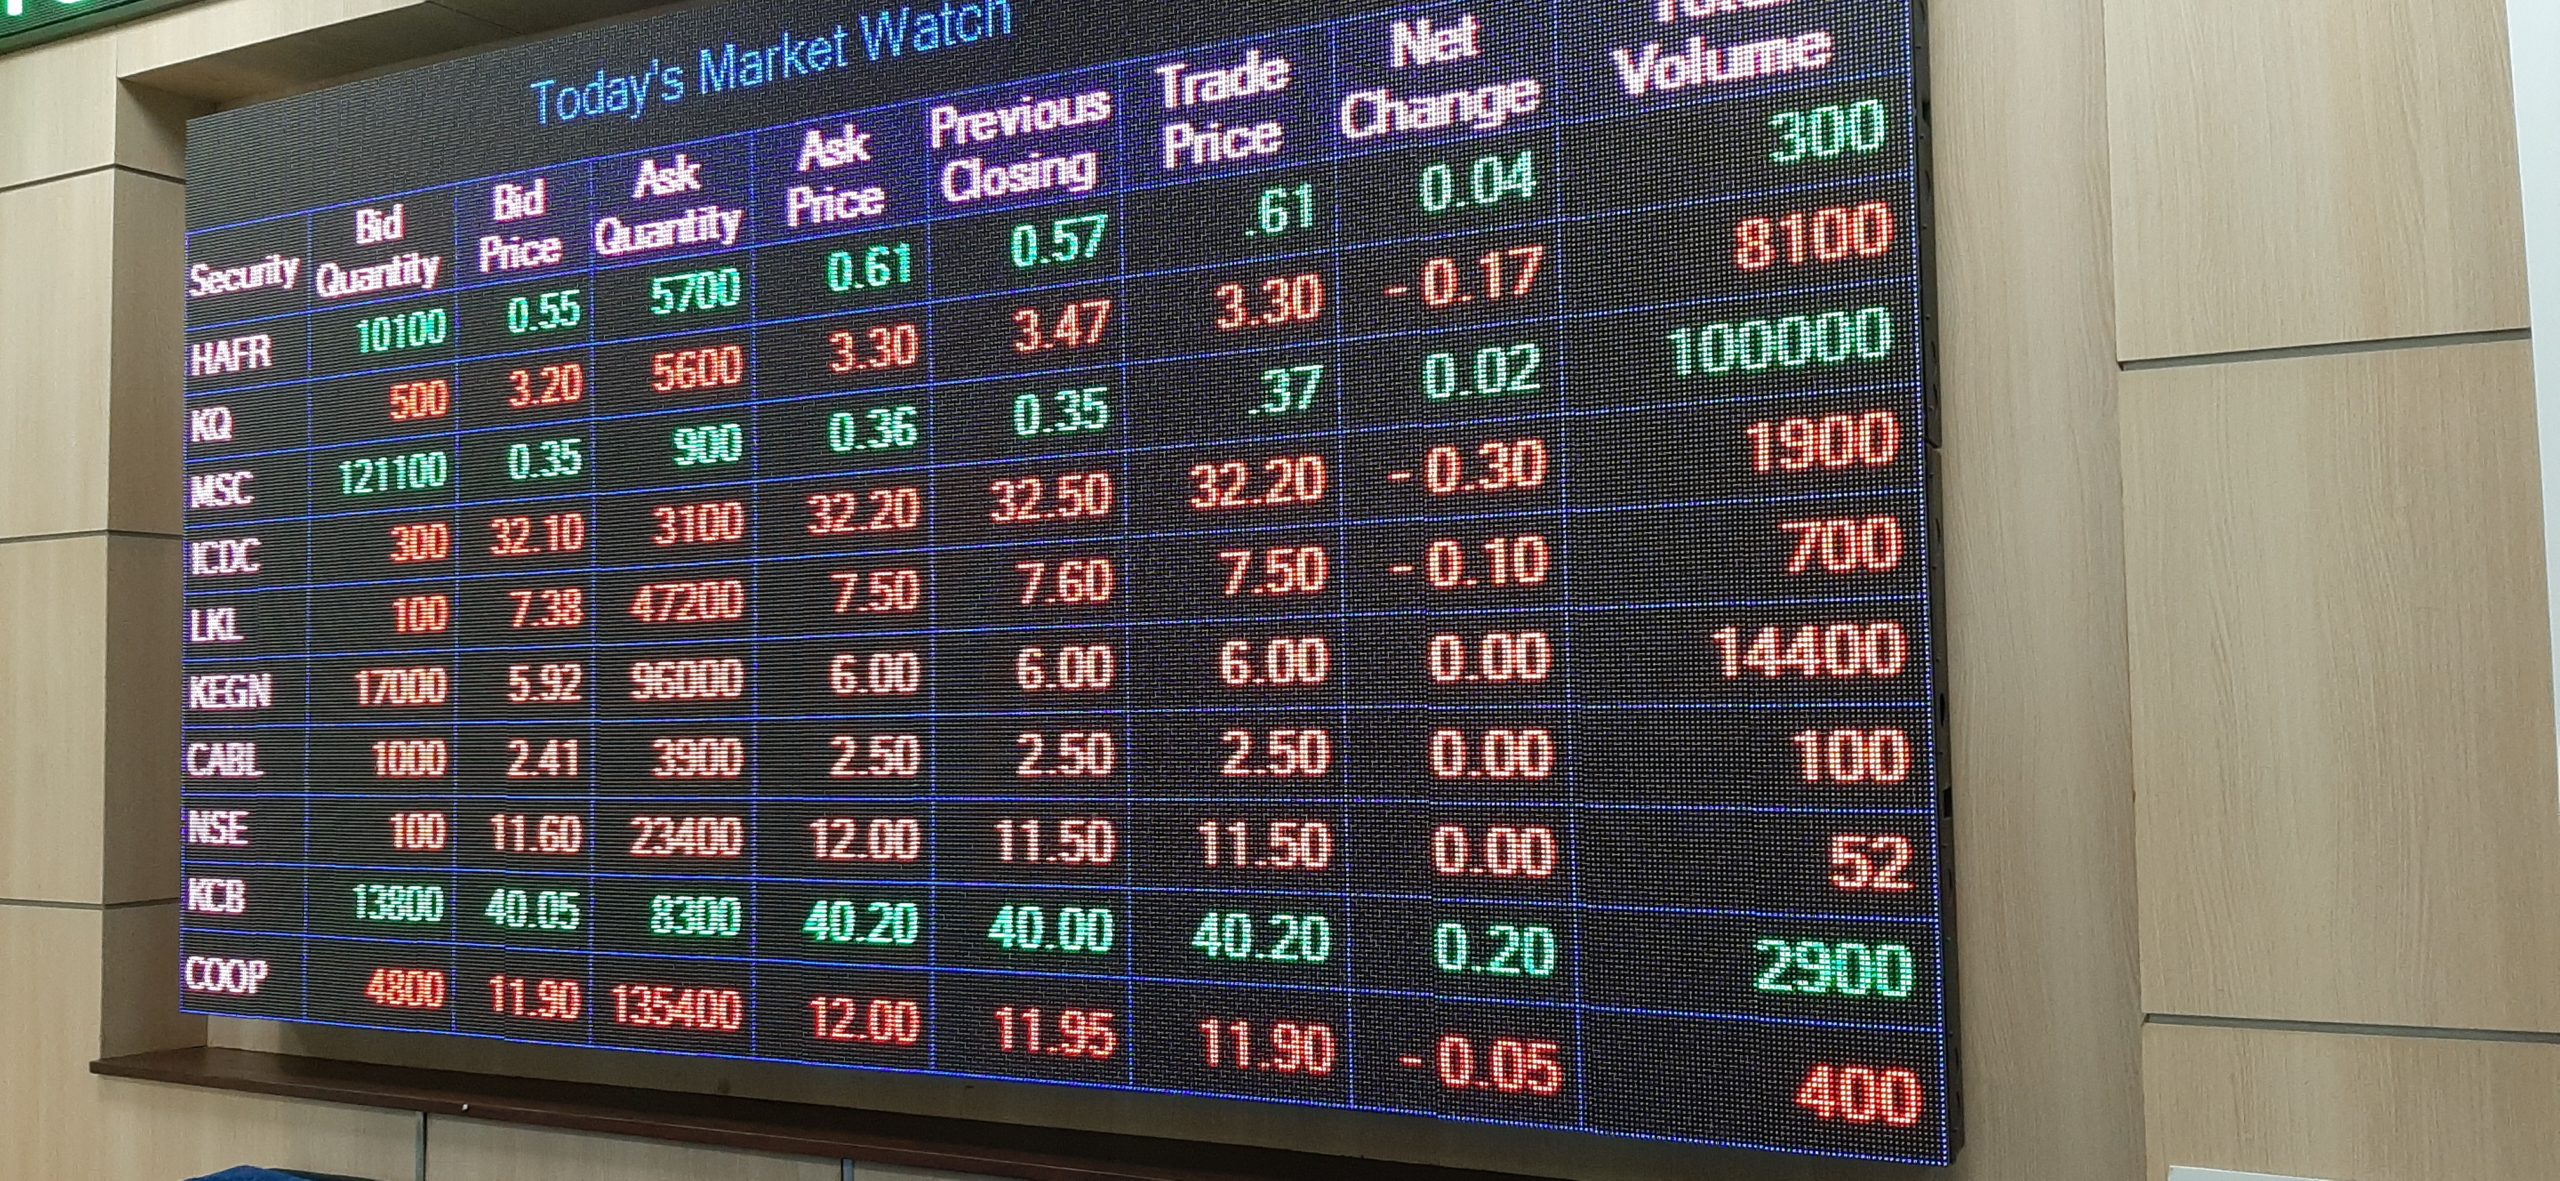 Foreign investors troop back to the NSE